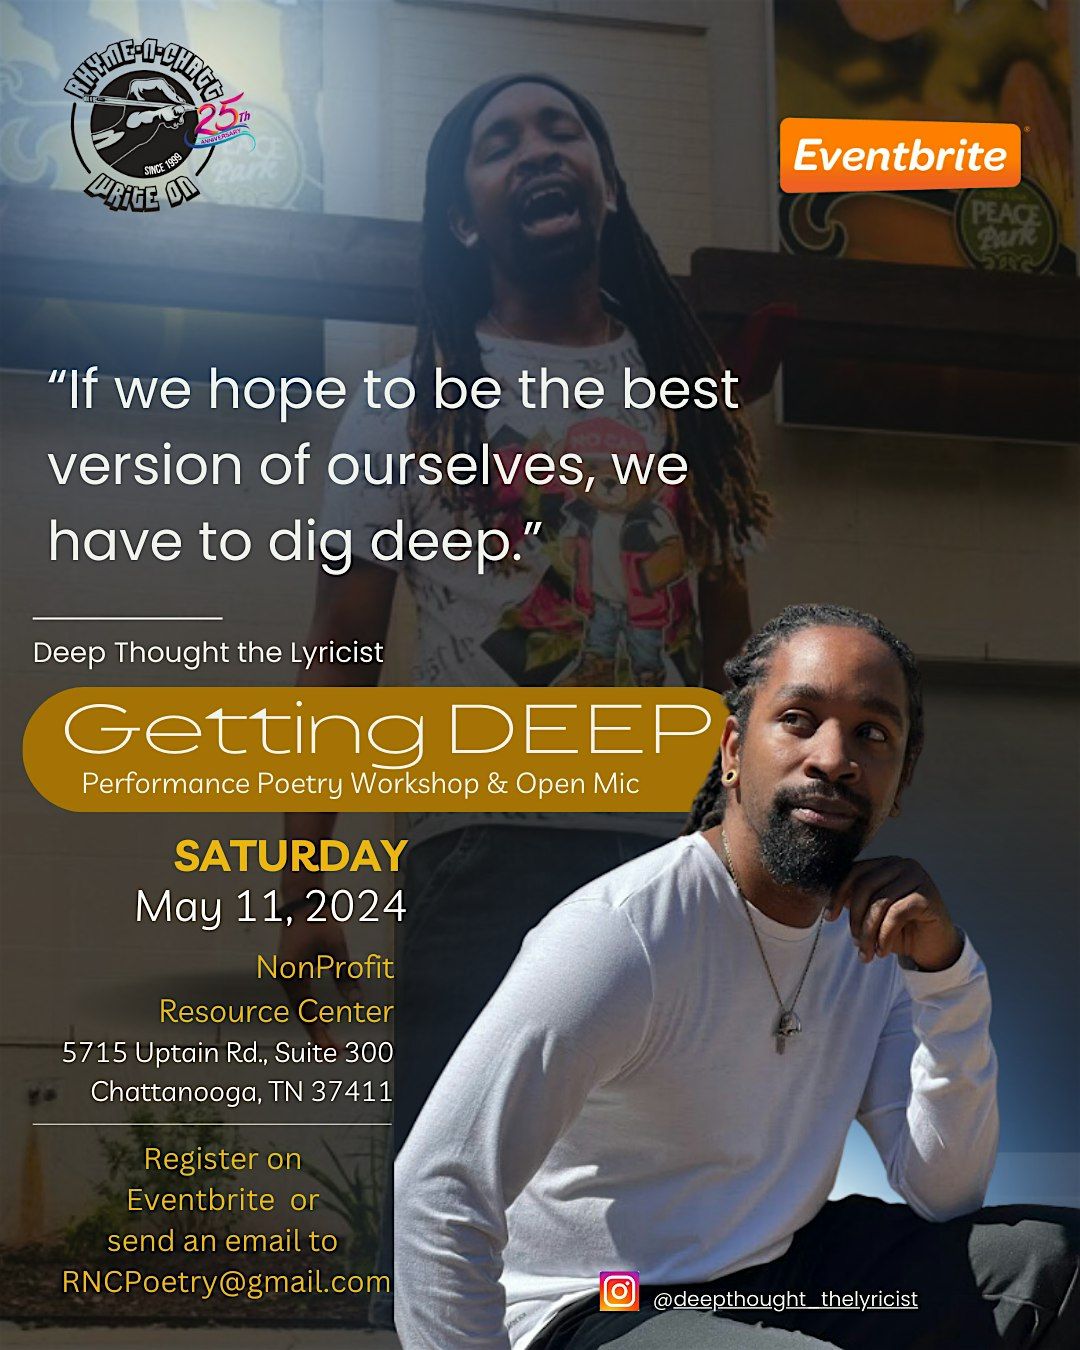 "DEEP" Performance Workshop & Open Mic session featuring "Deep Thought the Lyricist"